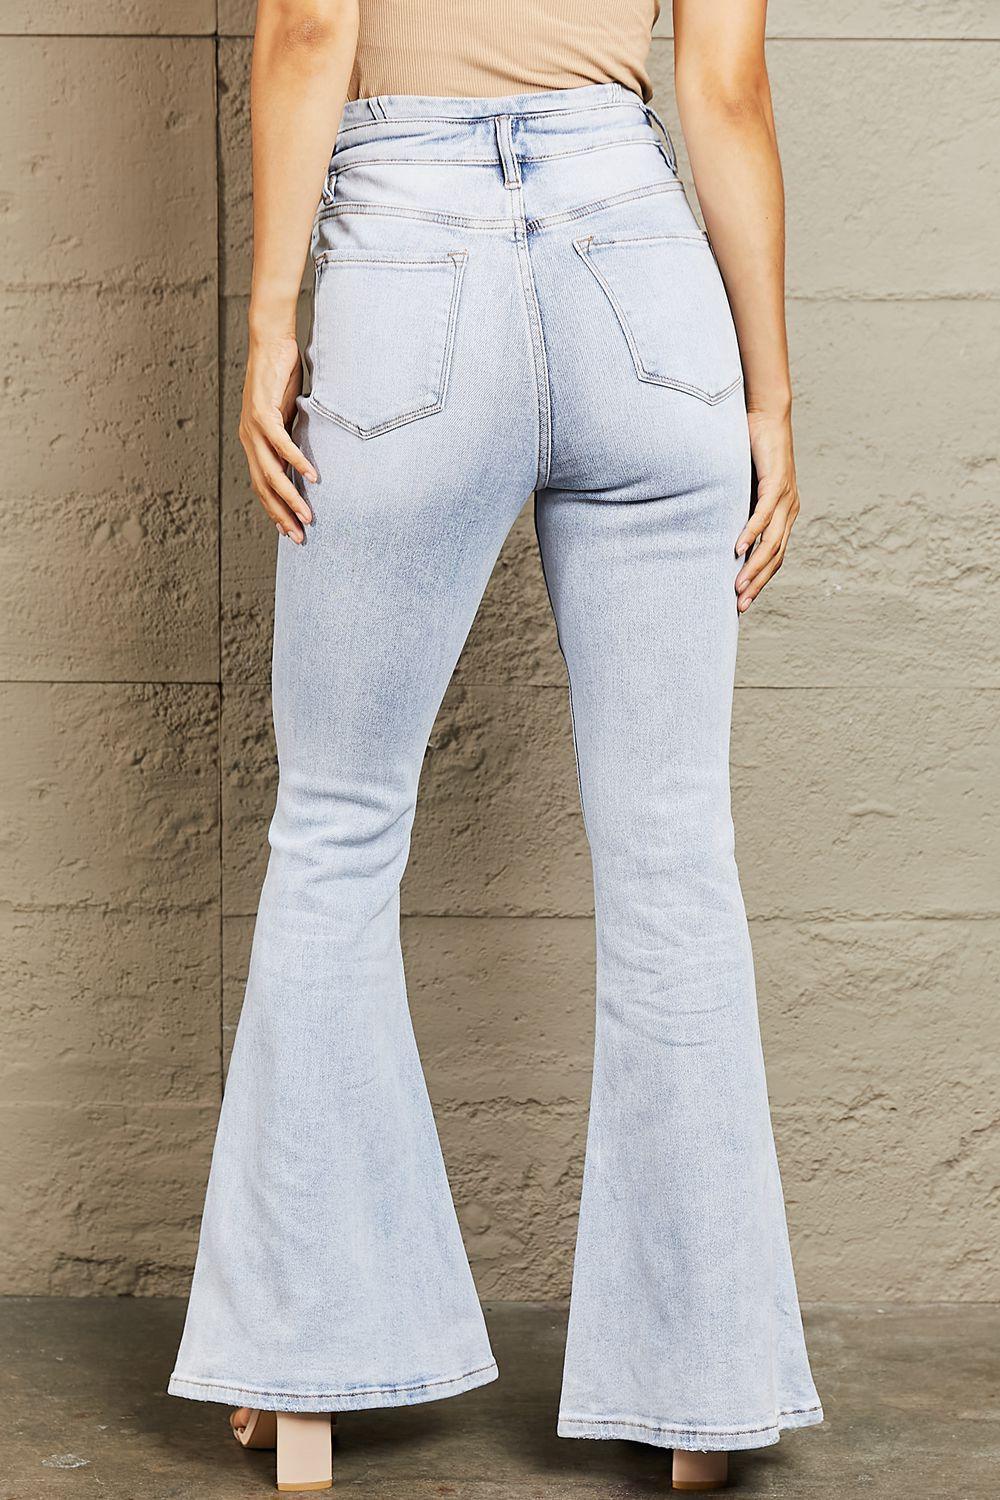 Retro Appeal High Waisted Button Fly Flare Jeans - MXSTUDIO.COM